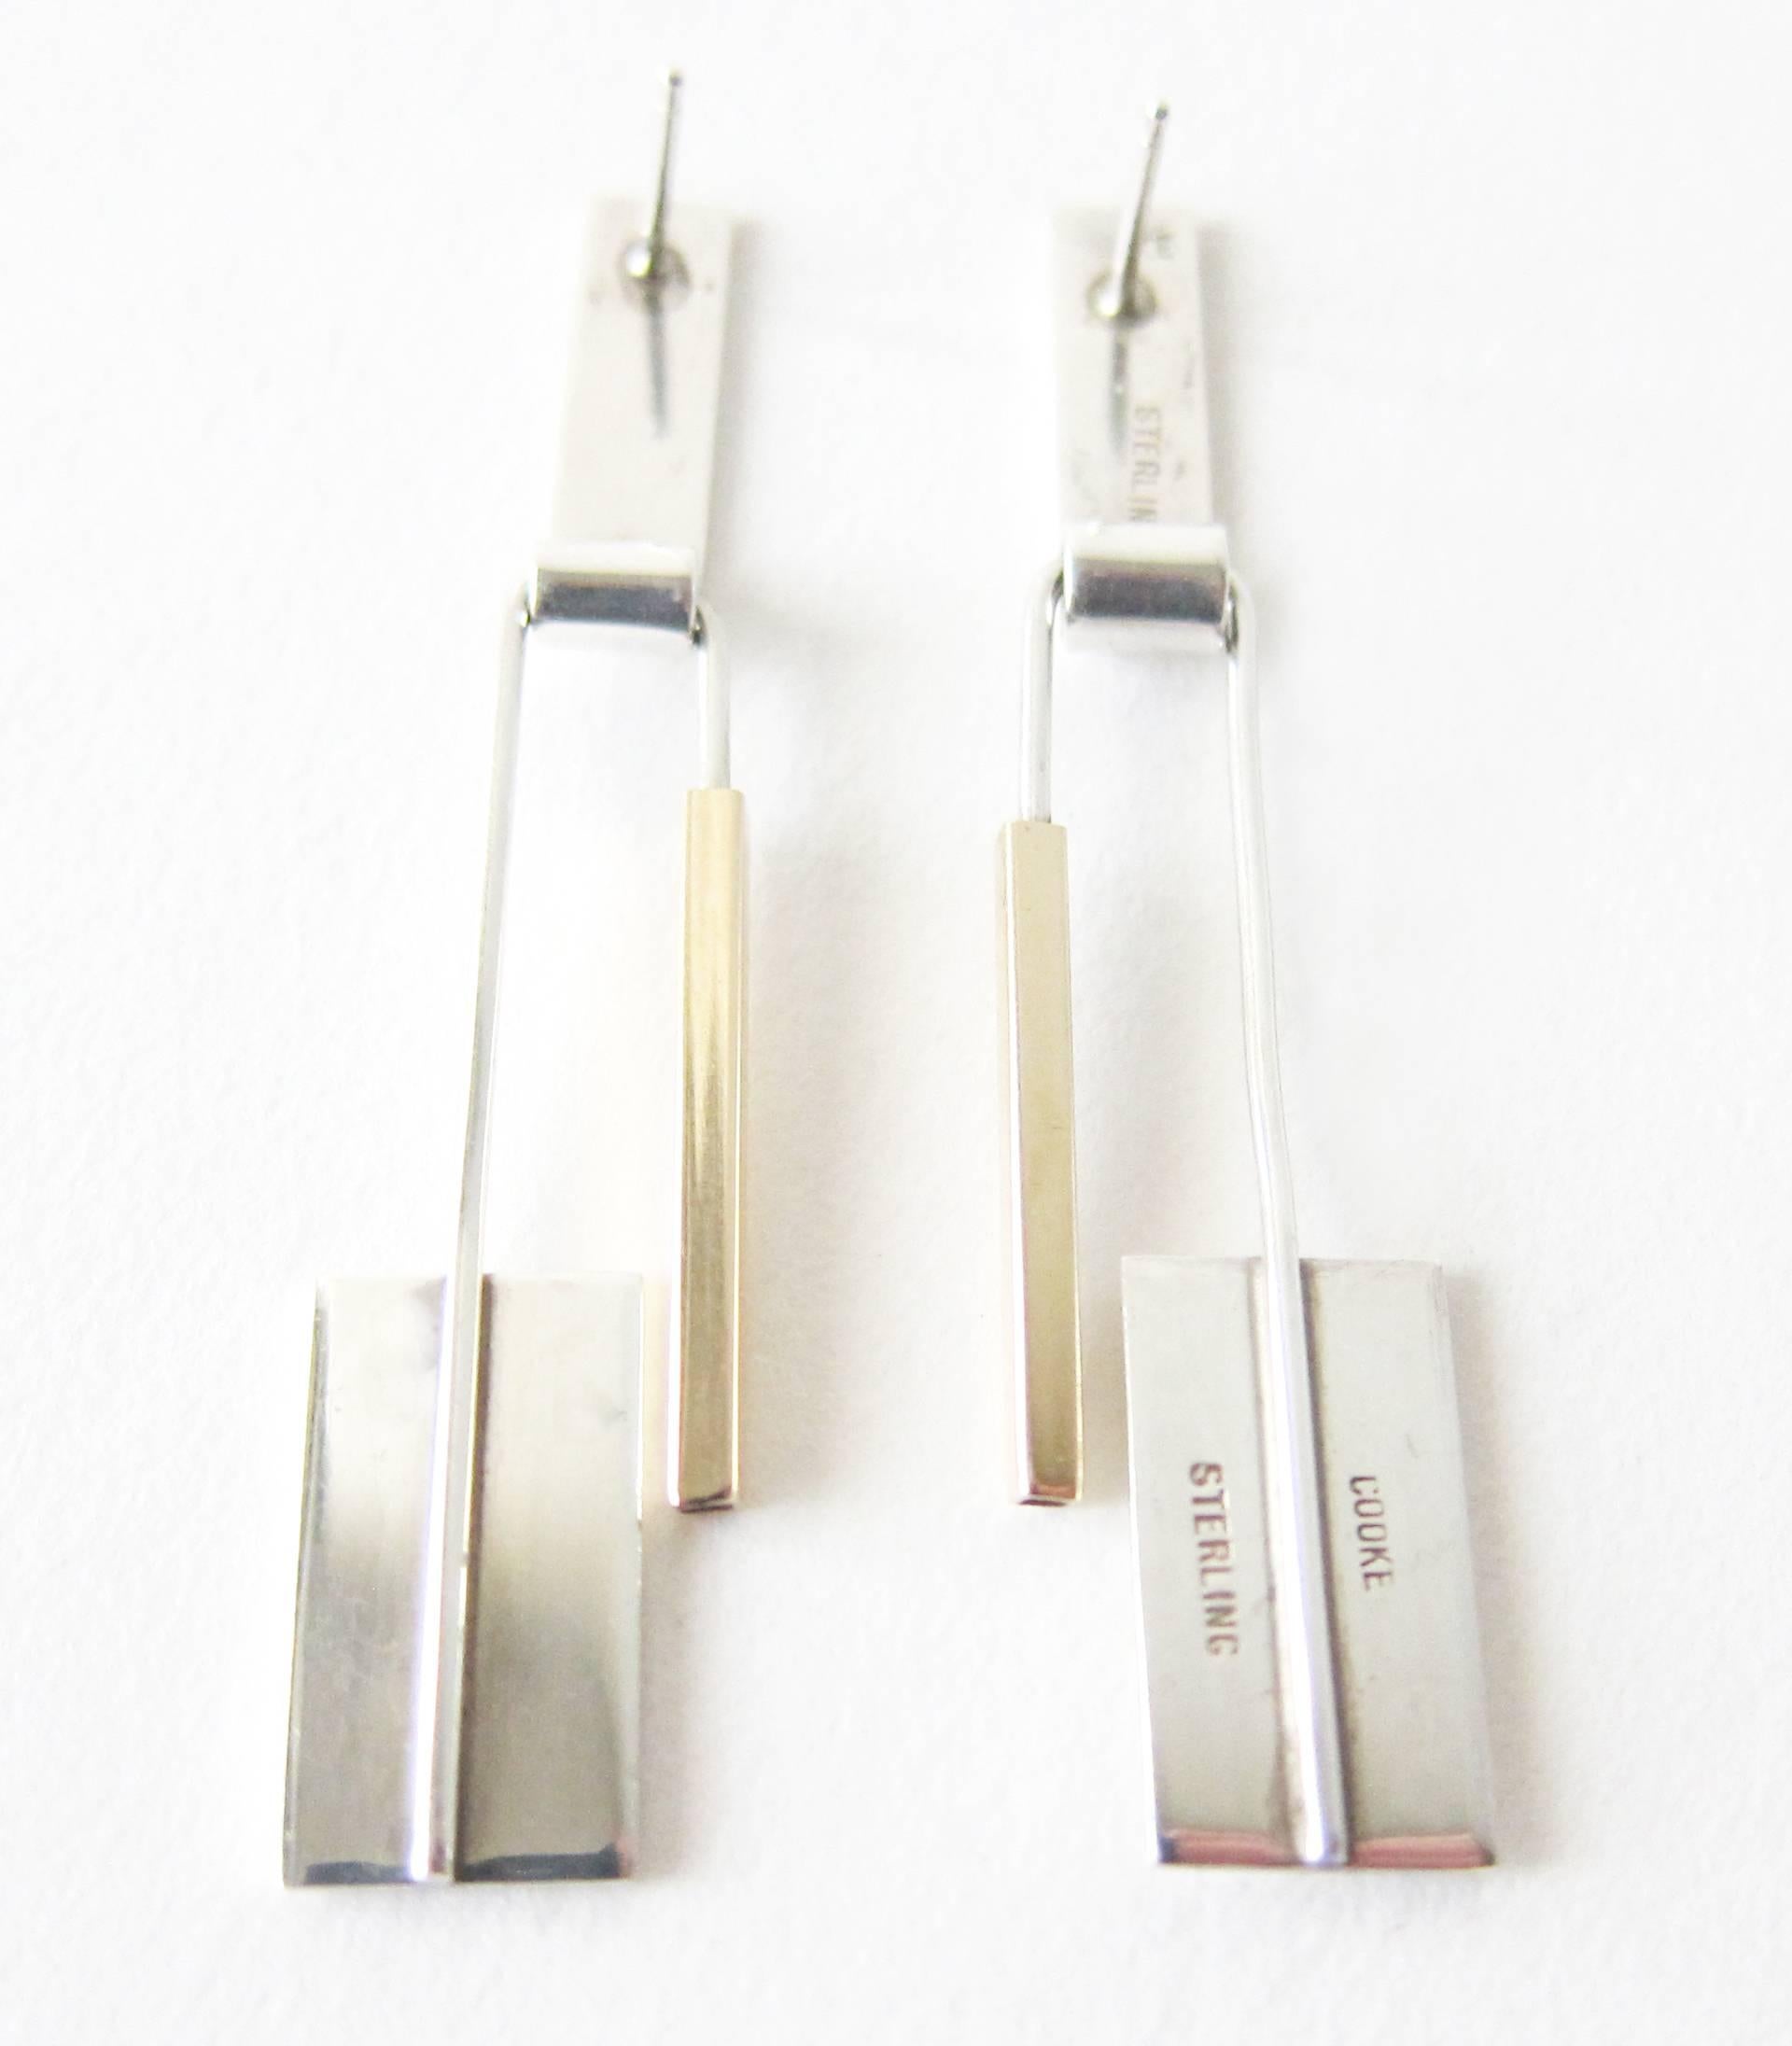 Timeless 14k gold and sterling silver earrings created by modernist jeweler Betty Cooke of Baltimore, Maryland.  Earrings have a swinging movement bottom section of sterling and gold, while the very top portion are partially brushed sterling silver.